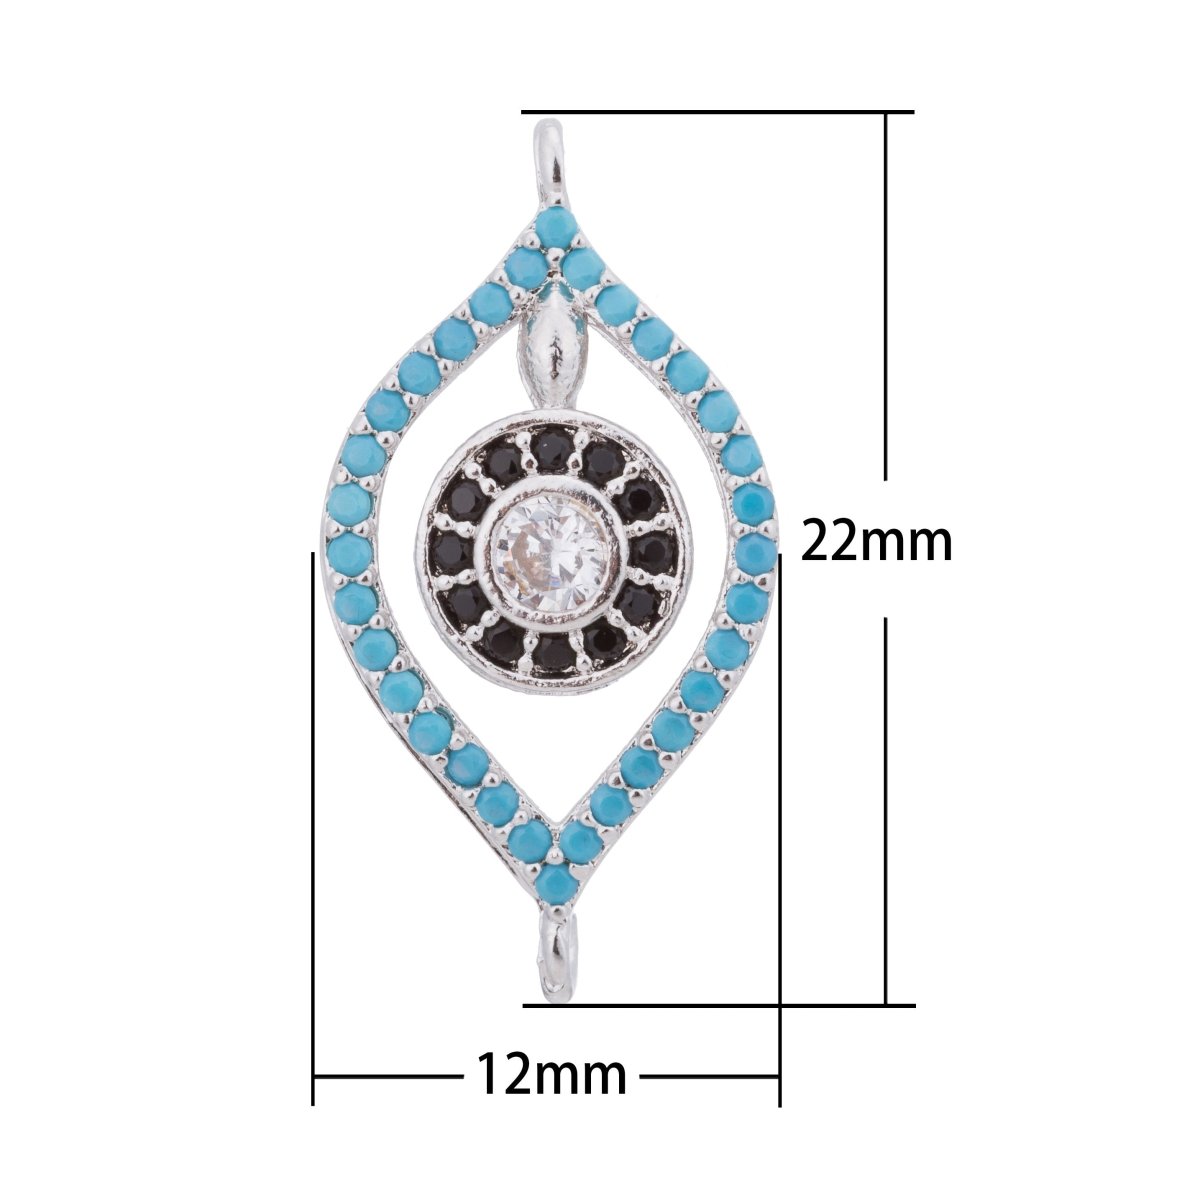 1pc Silver Turquoise Evil Eye, Black Dainty Pendant, Women Cubic Zirconia Bracelet Charm Bead Spacer Finding Connector For Jewelry Making - DLUXCA